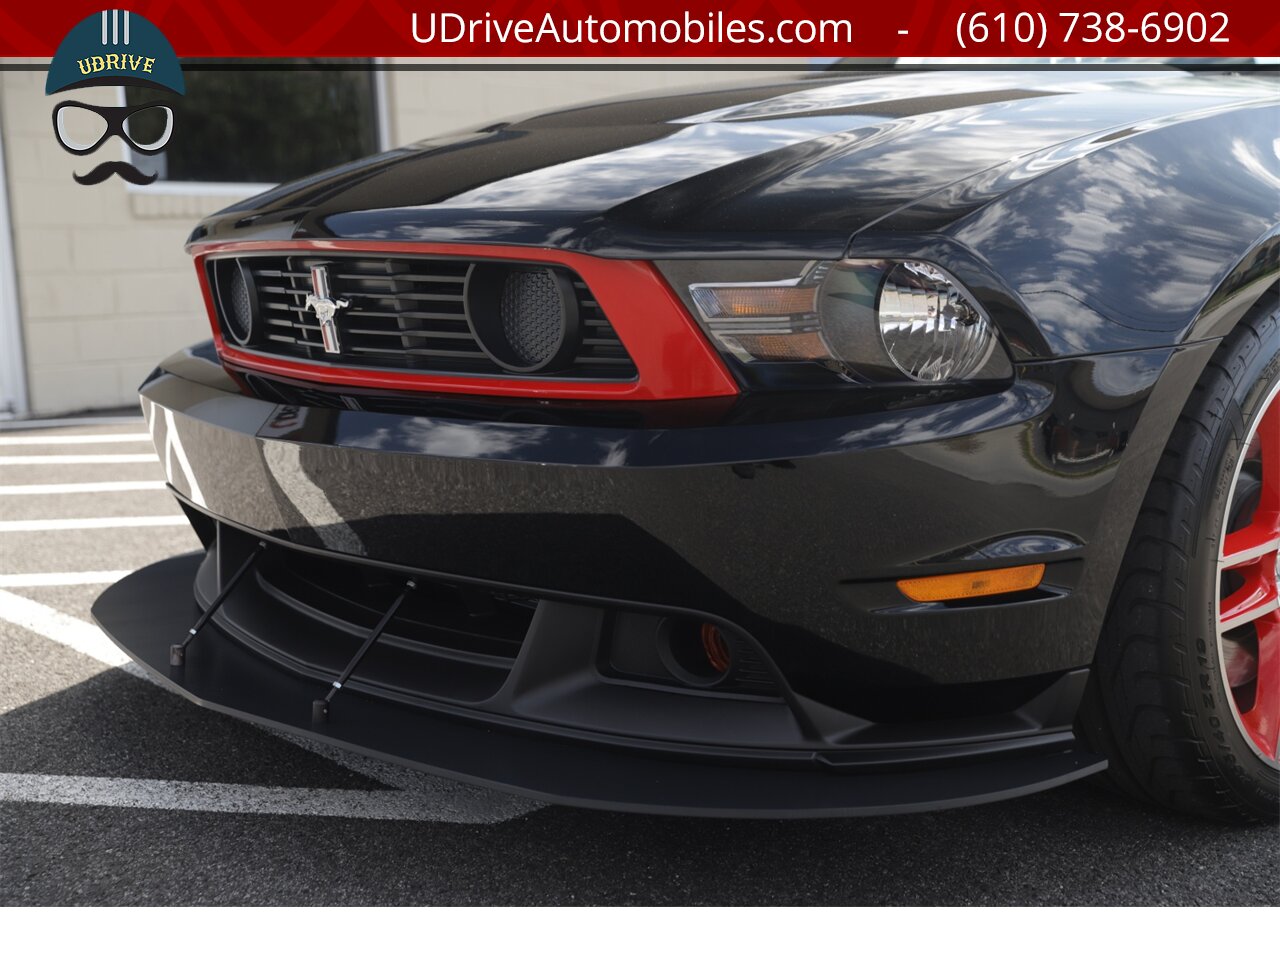 2012 Ford Mustang 866 Miles Boss 302 Laguna Seca #338 of 750  Red TracKey Activated - Photo 10 - West Chester, PA 19382